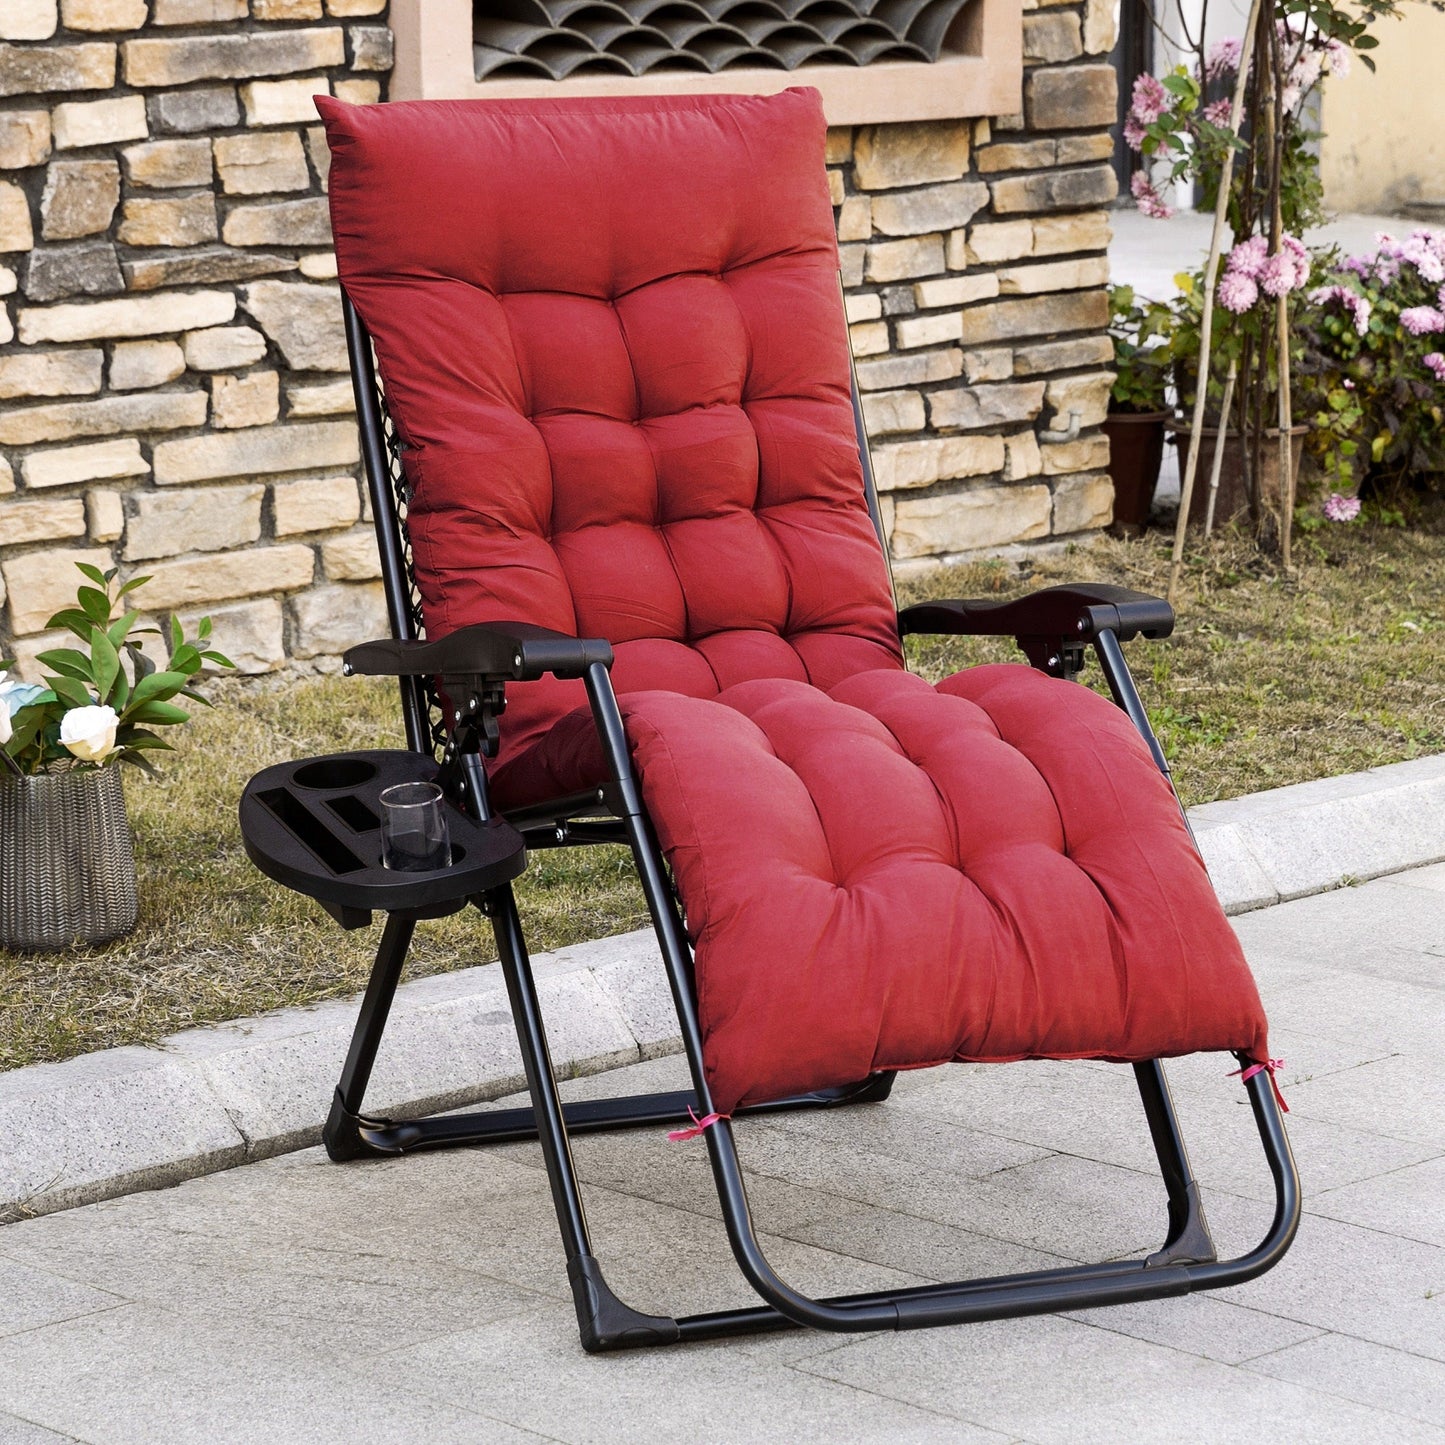 -Outsunny Padded Zero Gravity Chair, Folding Recliner Chair with Cup Holder Cushion, Red - Outdoor Style Company